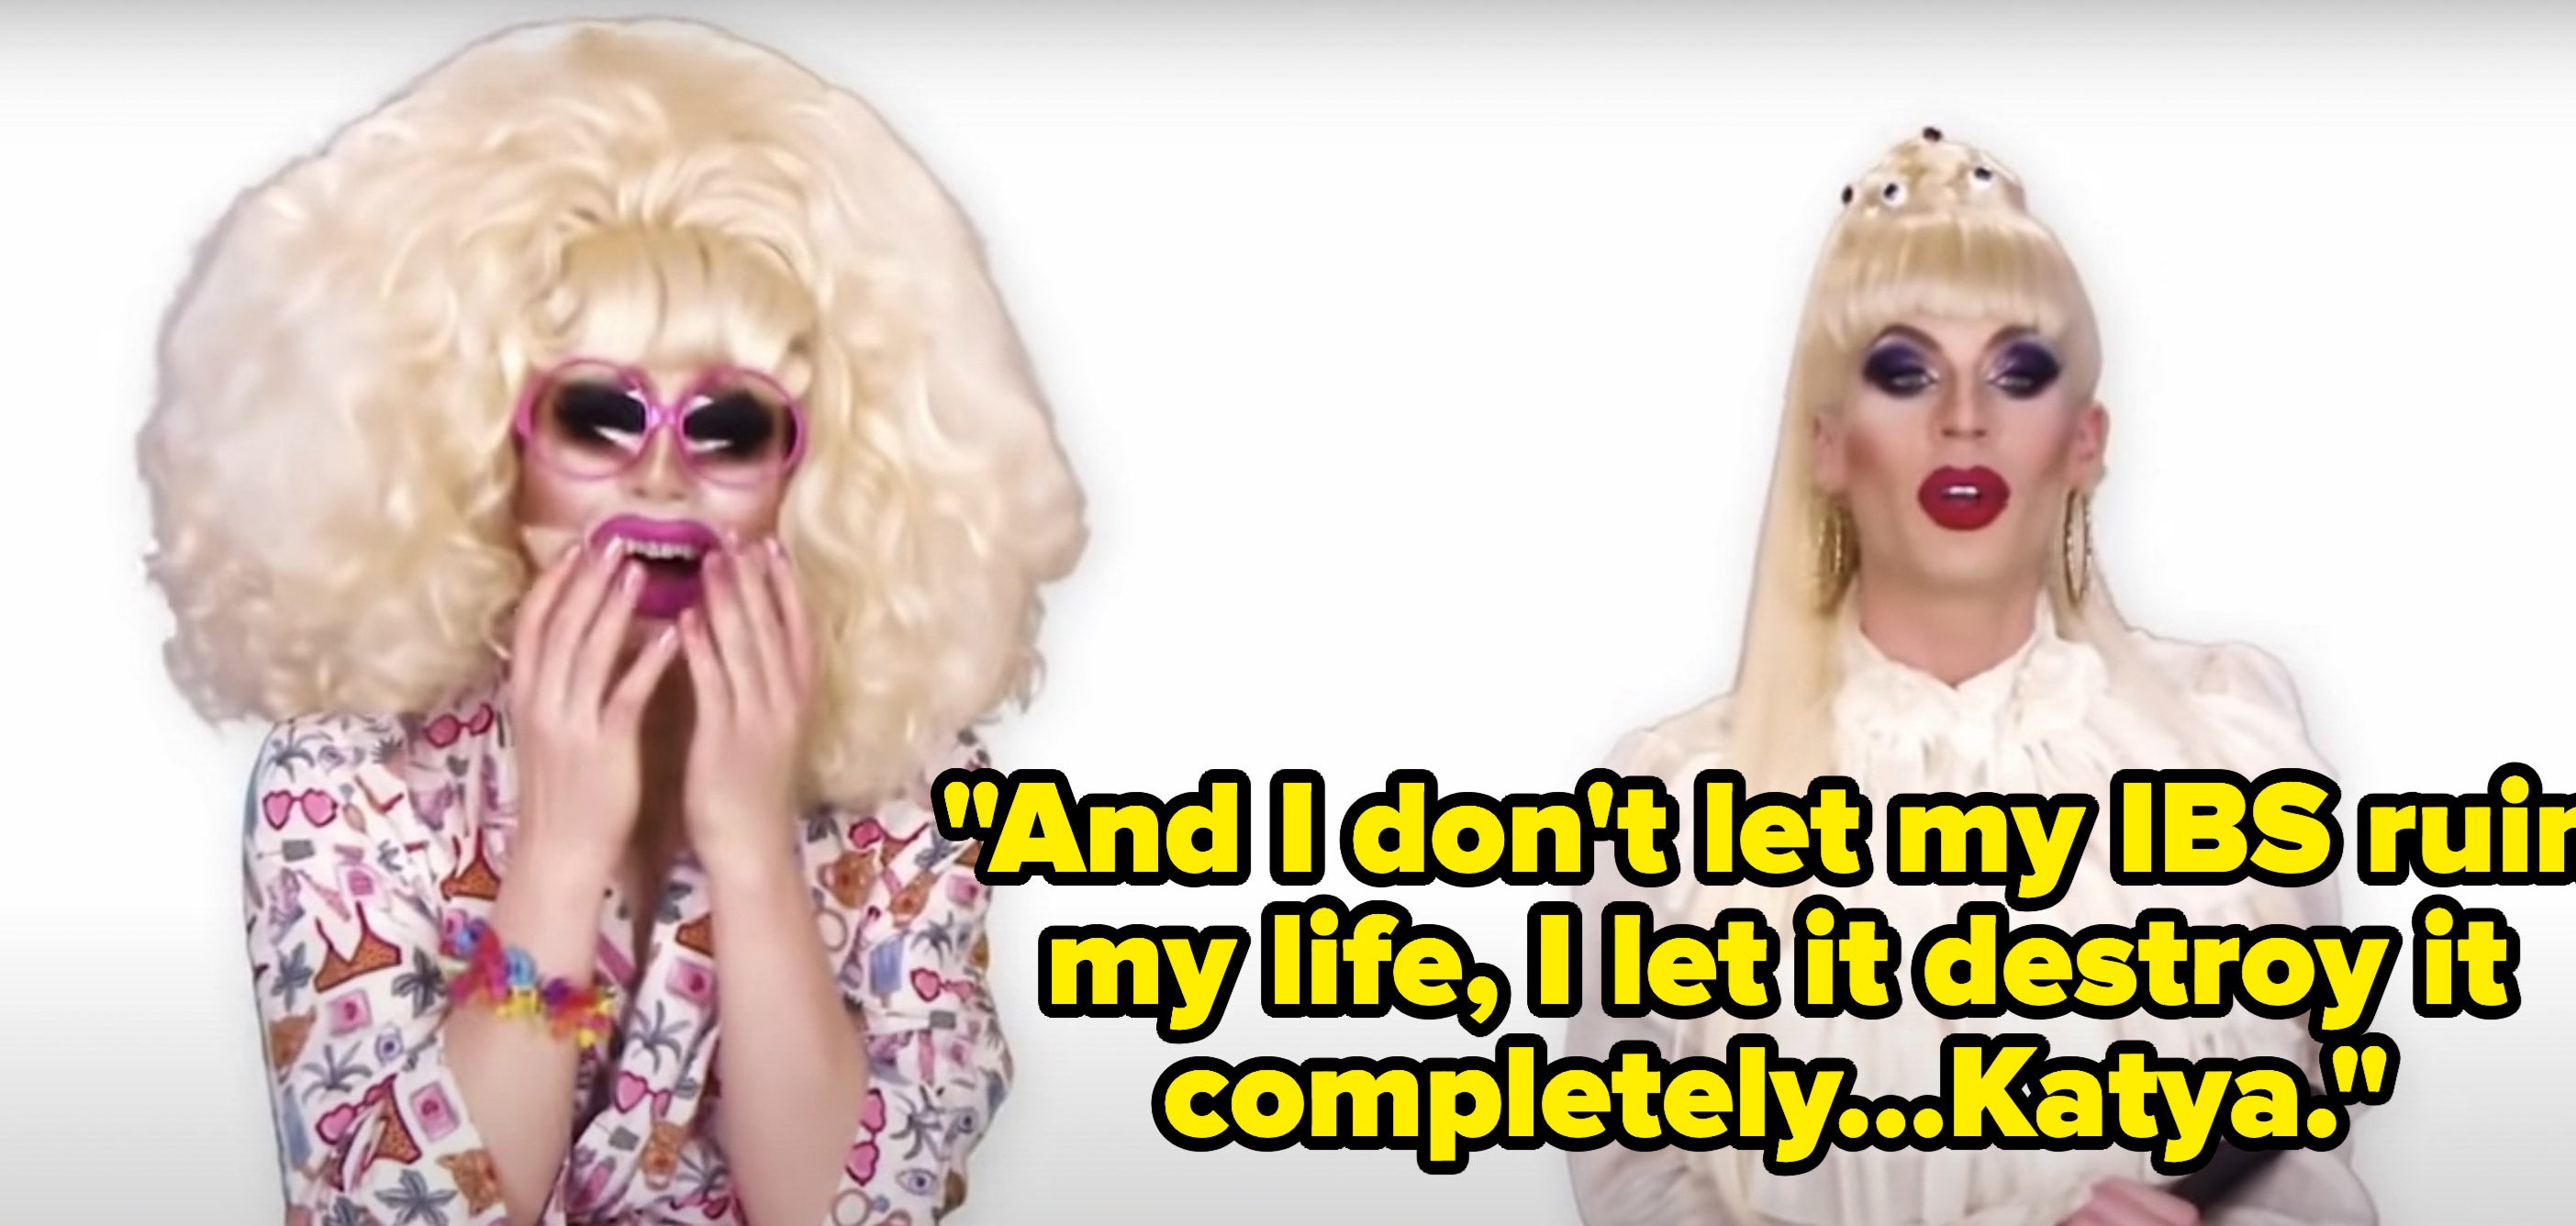 Katya says, And I dont let my IBS ruin my life, I let it destroy it completely, Katya